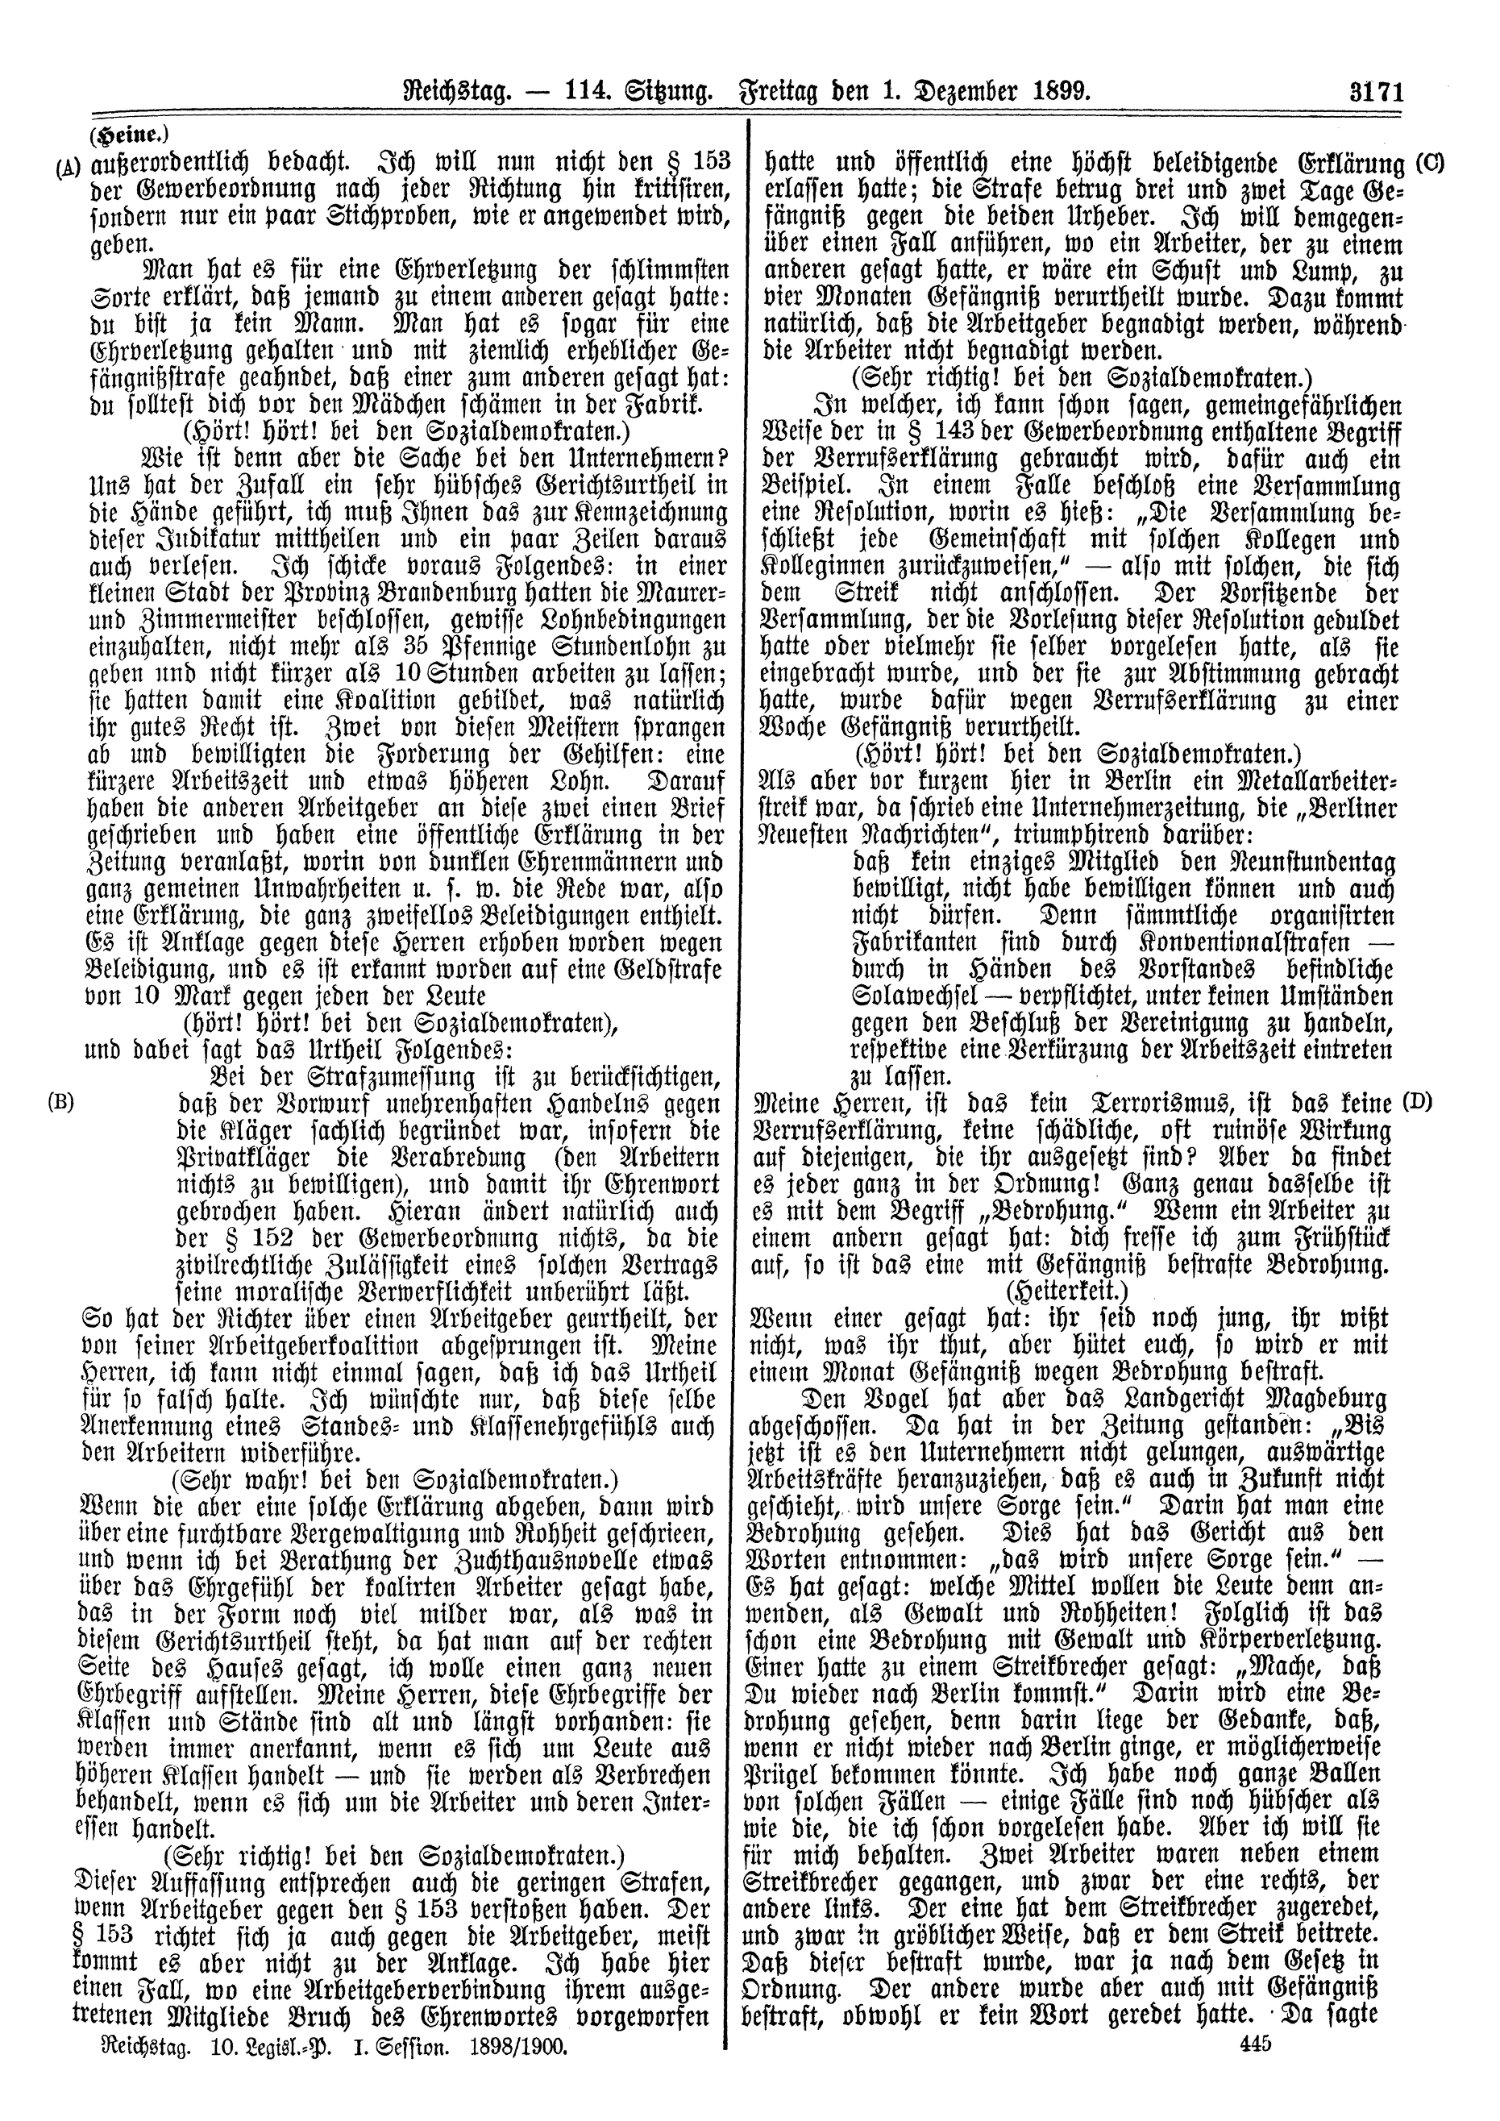 Scan of page 3171